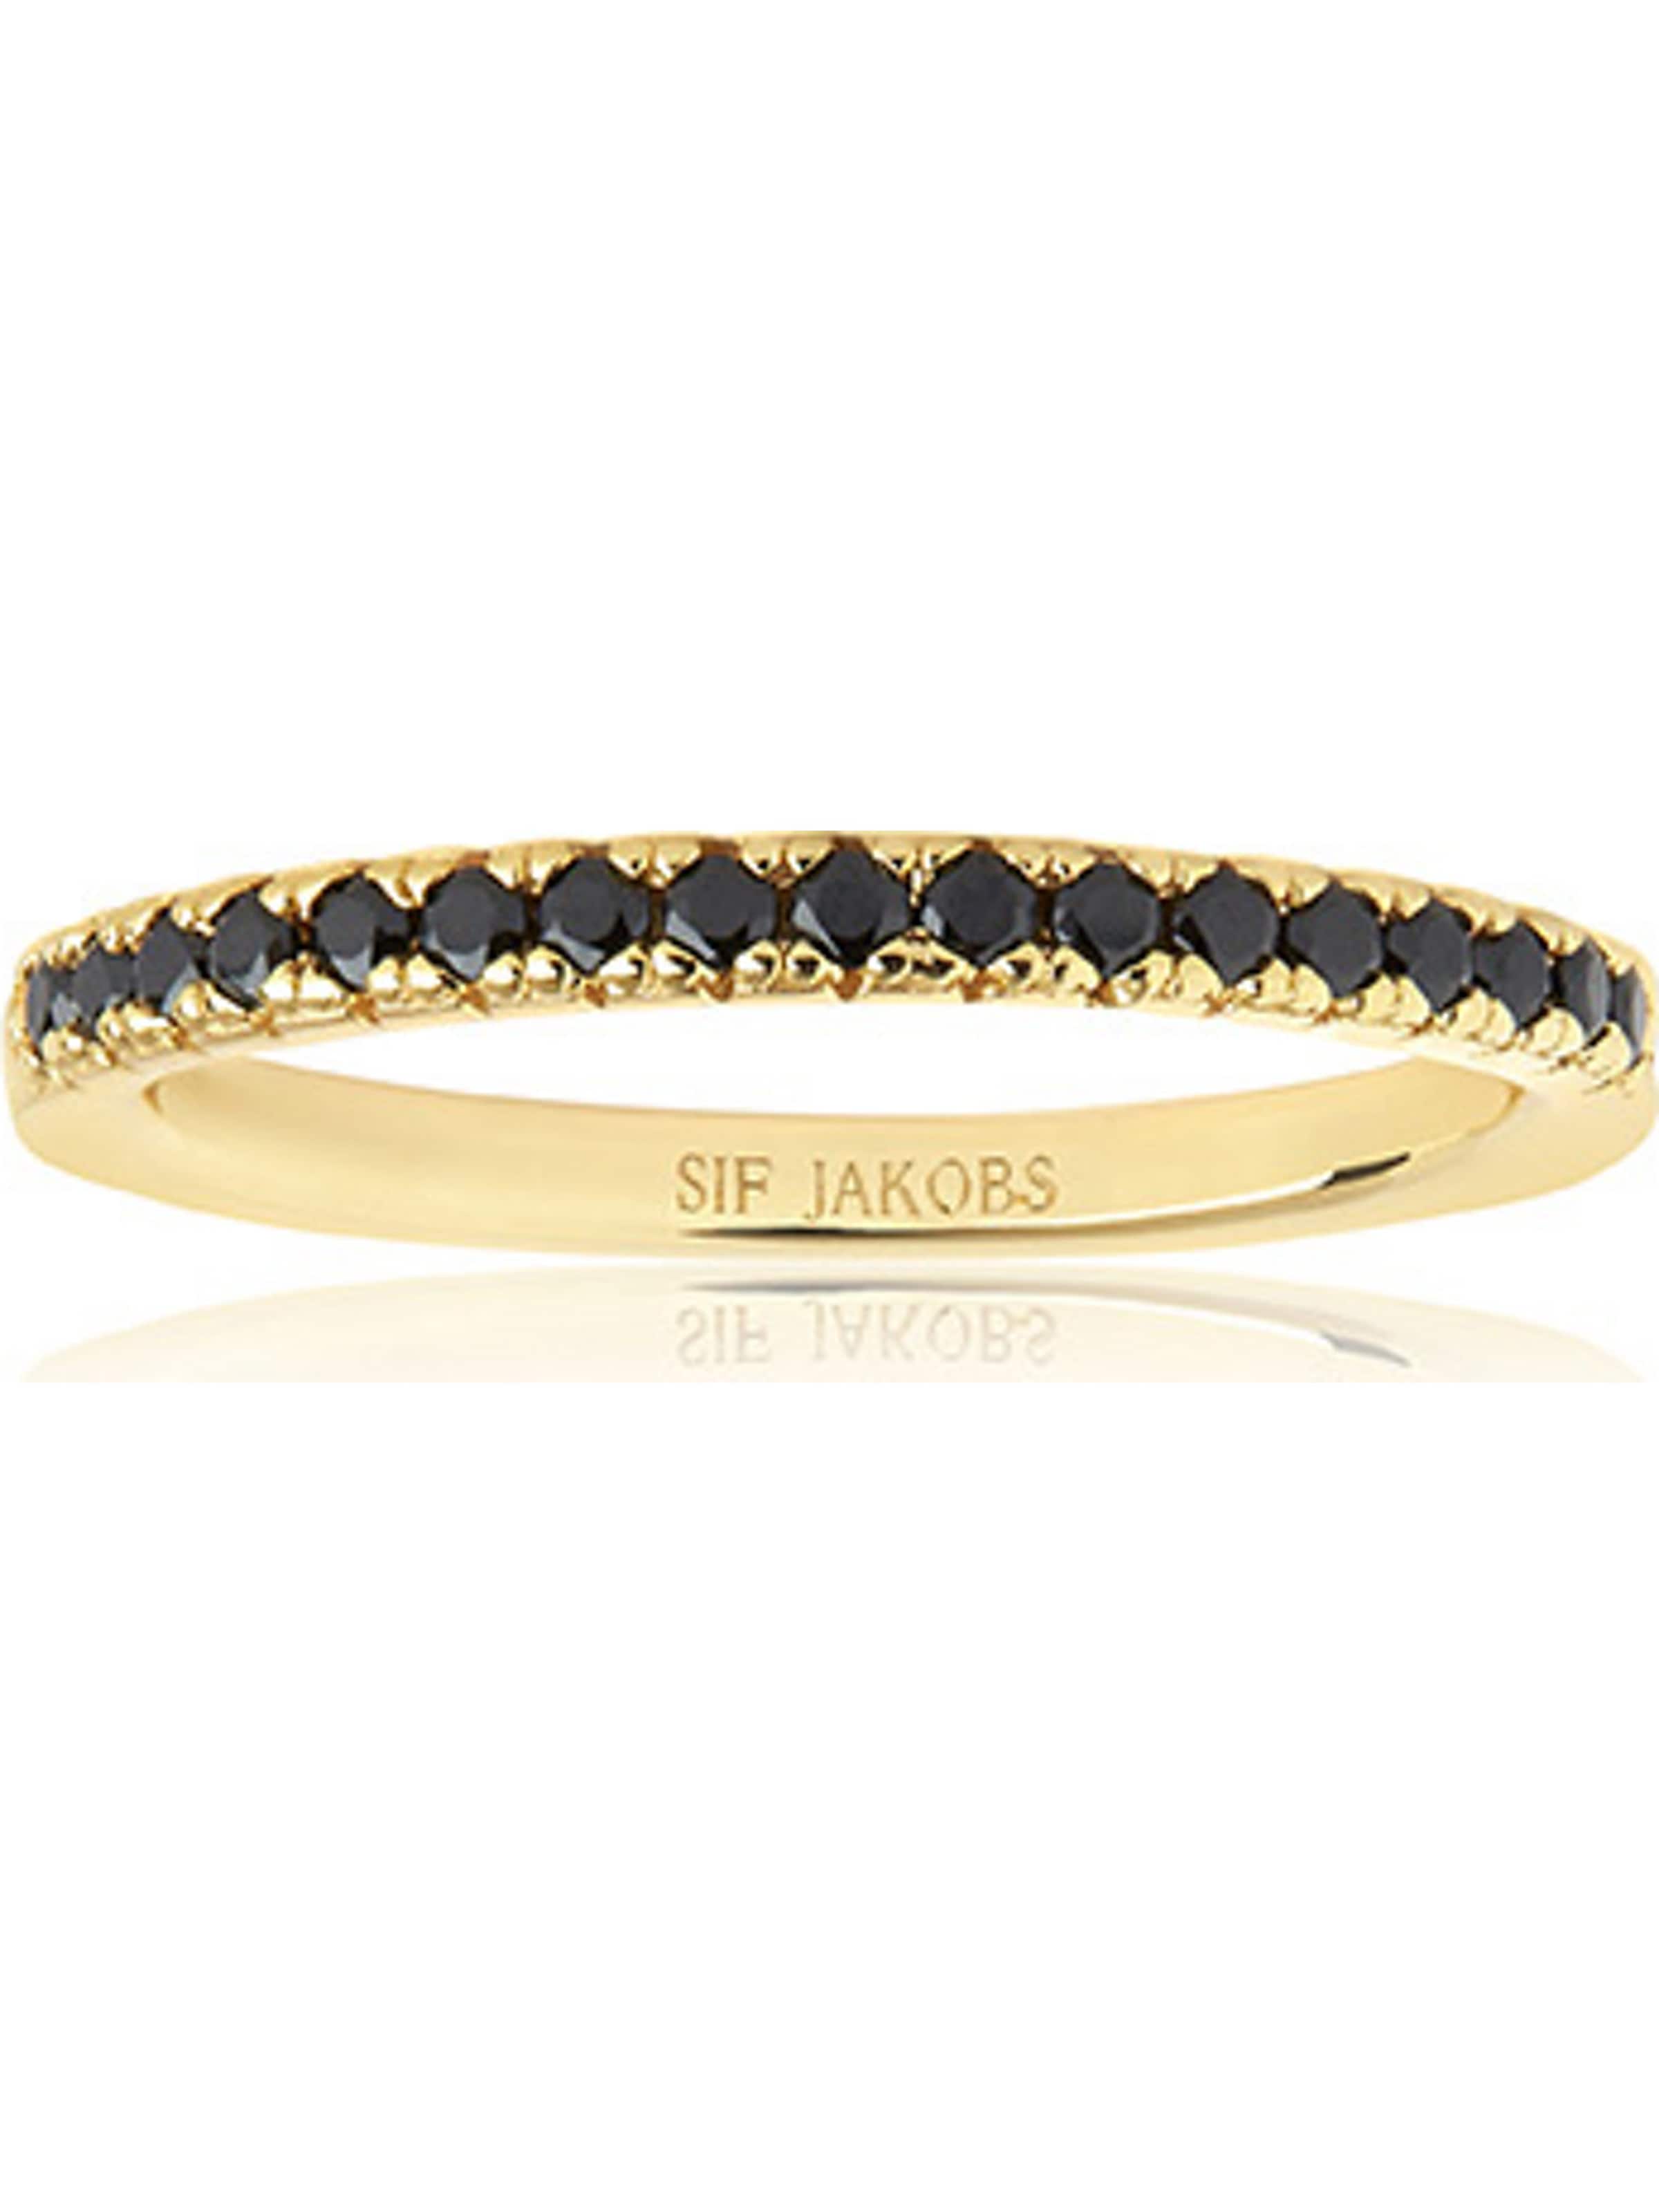 Sif Jakobs Ring in Gold 